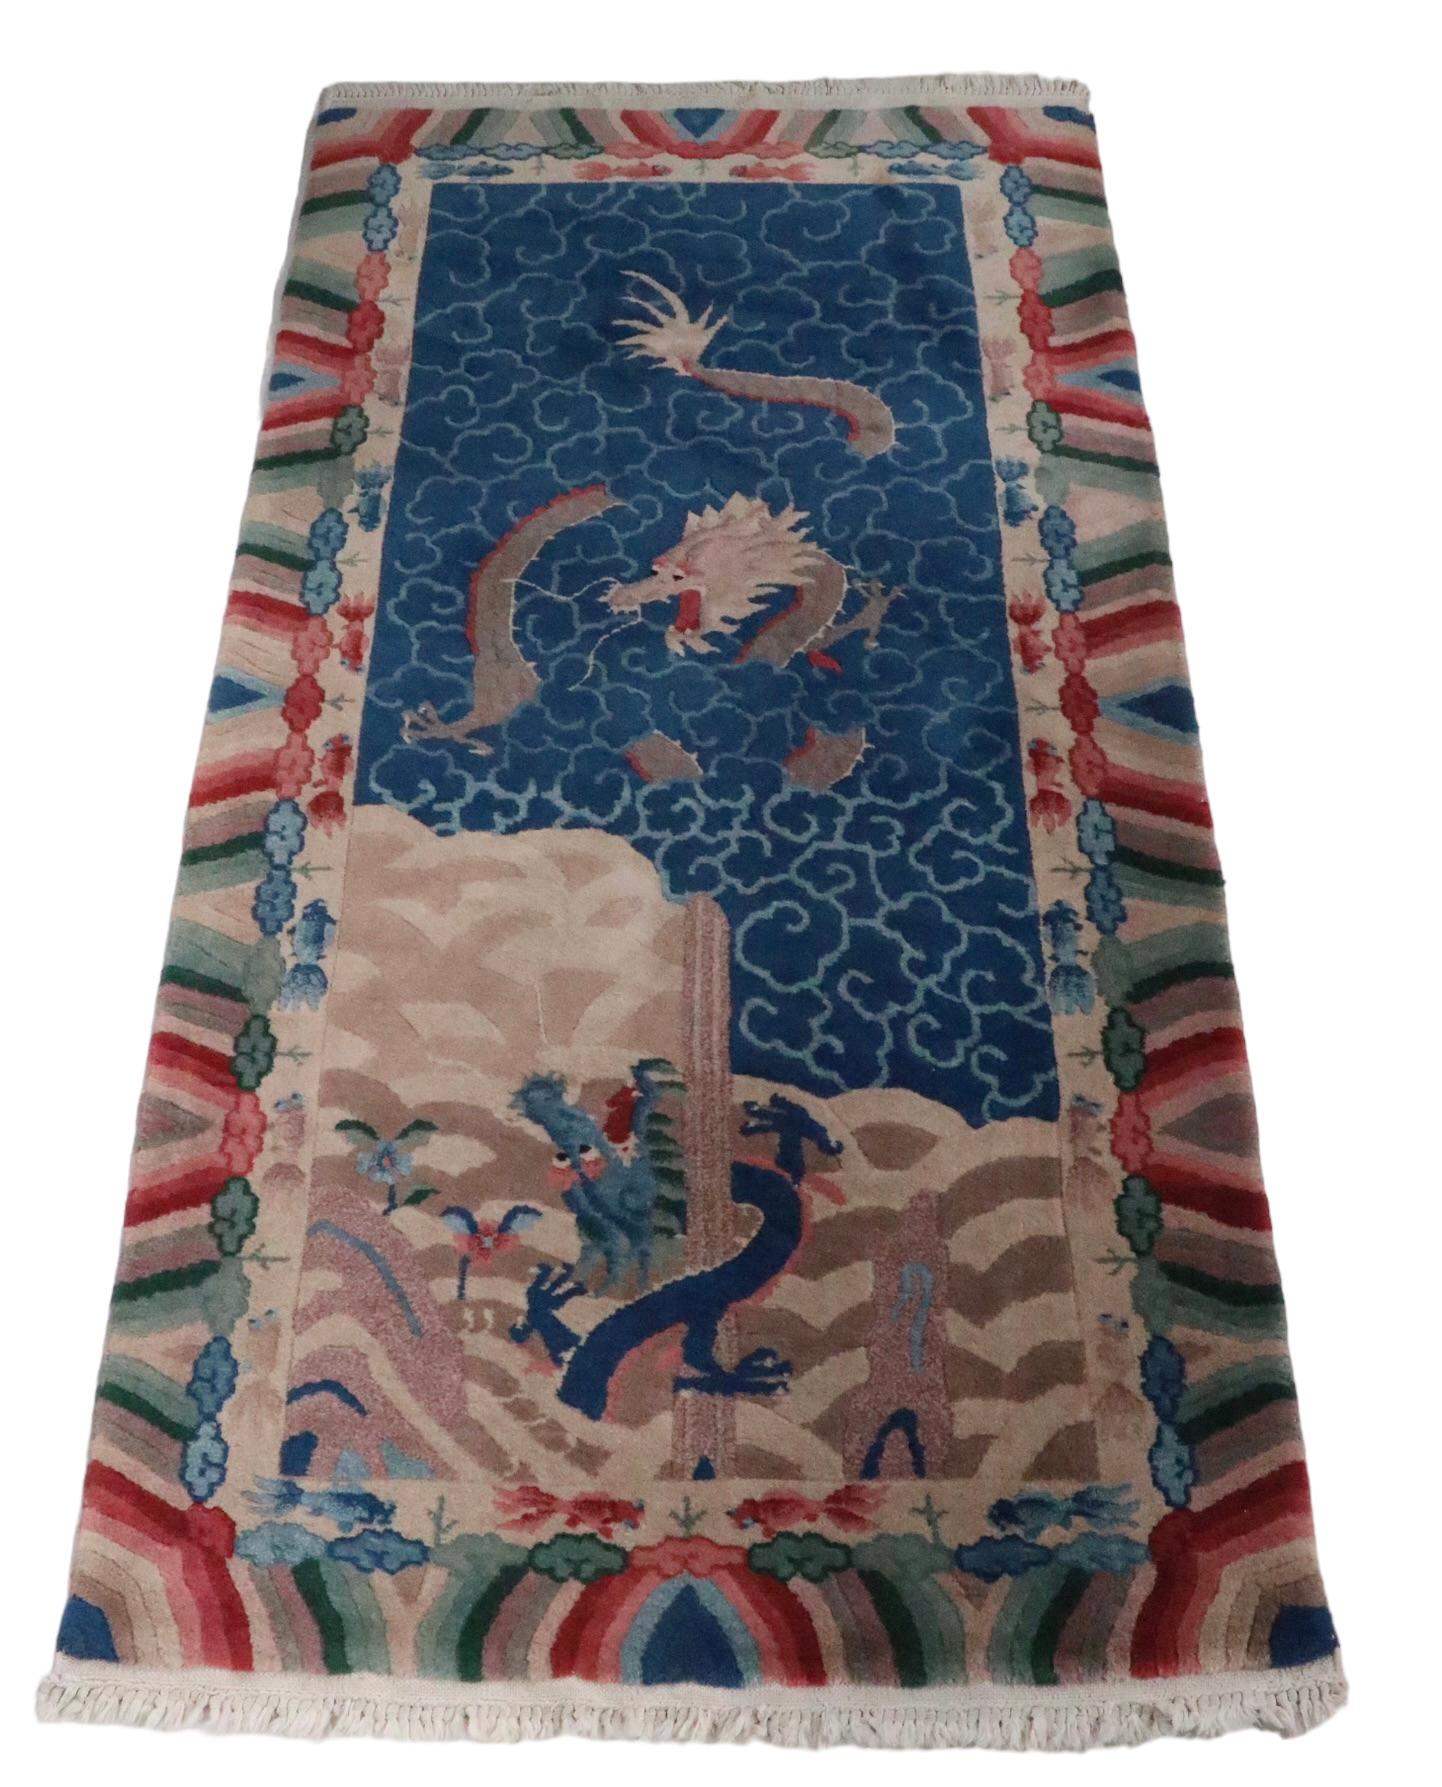  Vintage Chinese Art Deco Area Scatter Rug with Imperial  Dragon Motif For Sale 3